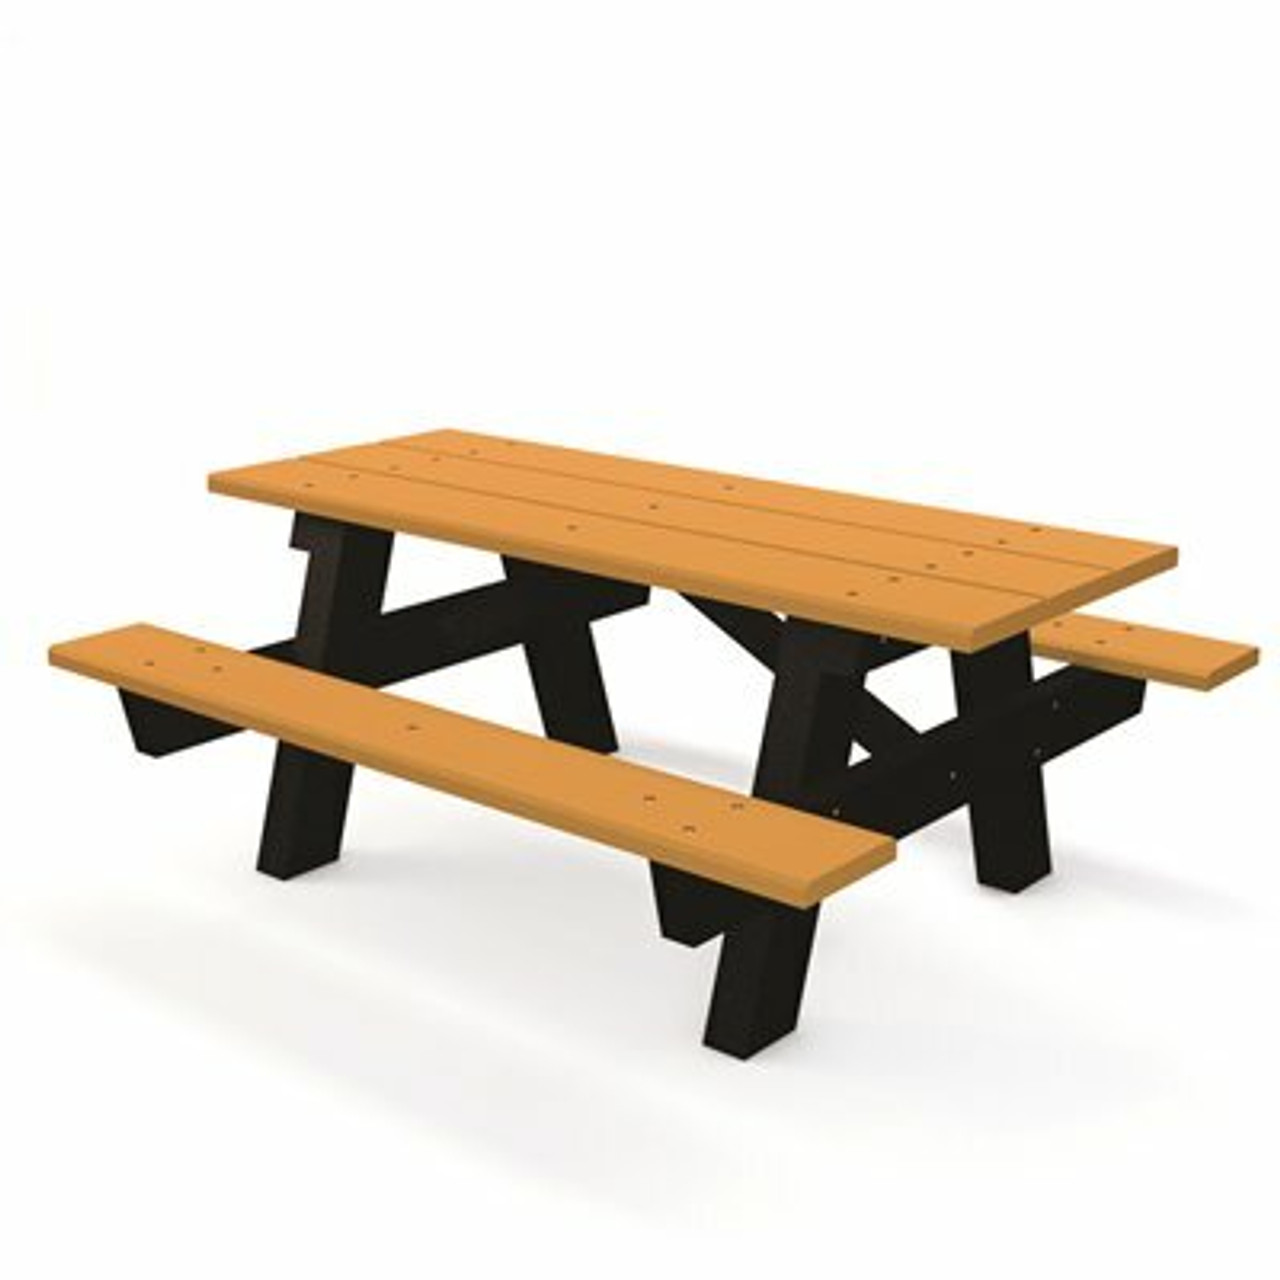 A-Frame 6 Ft. Cedar Recycled Plastic Picnic Table